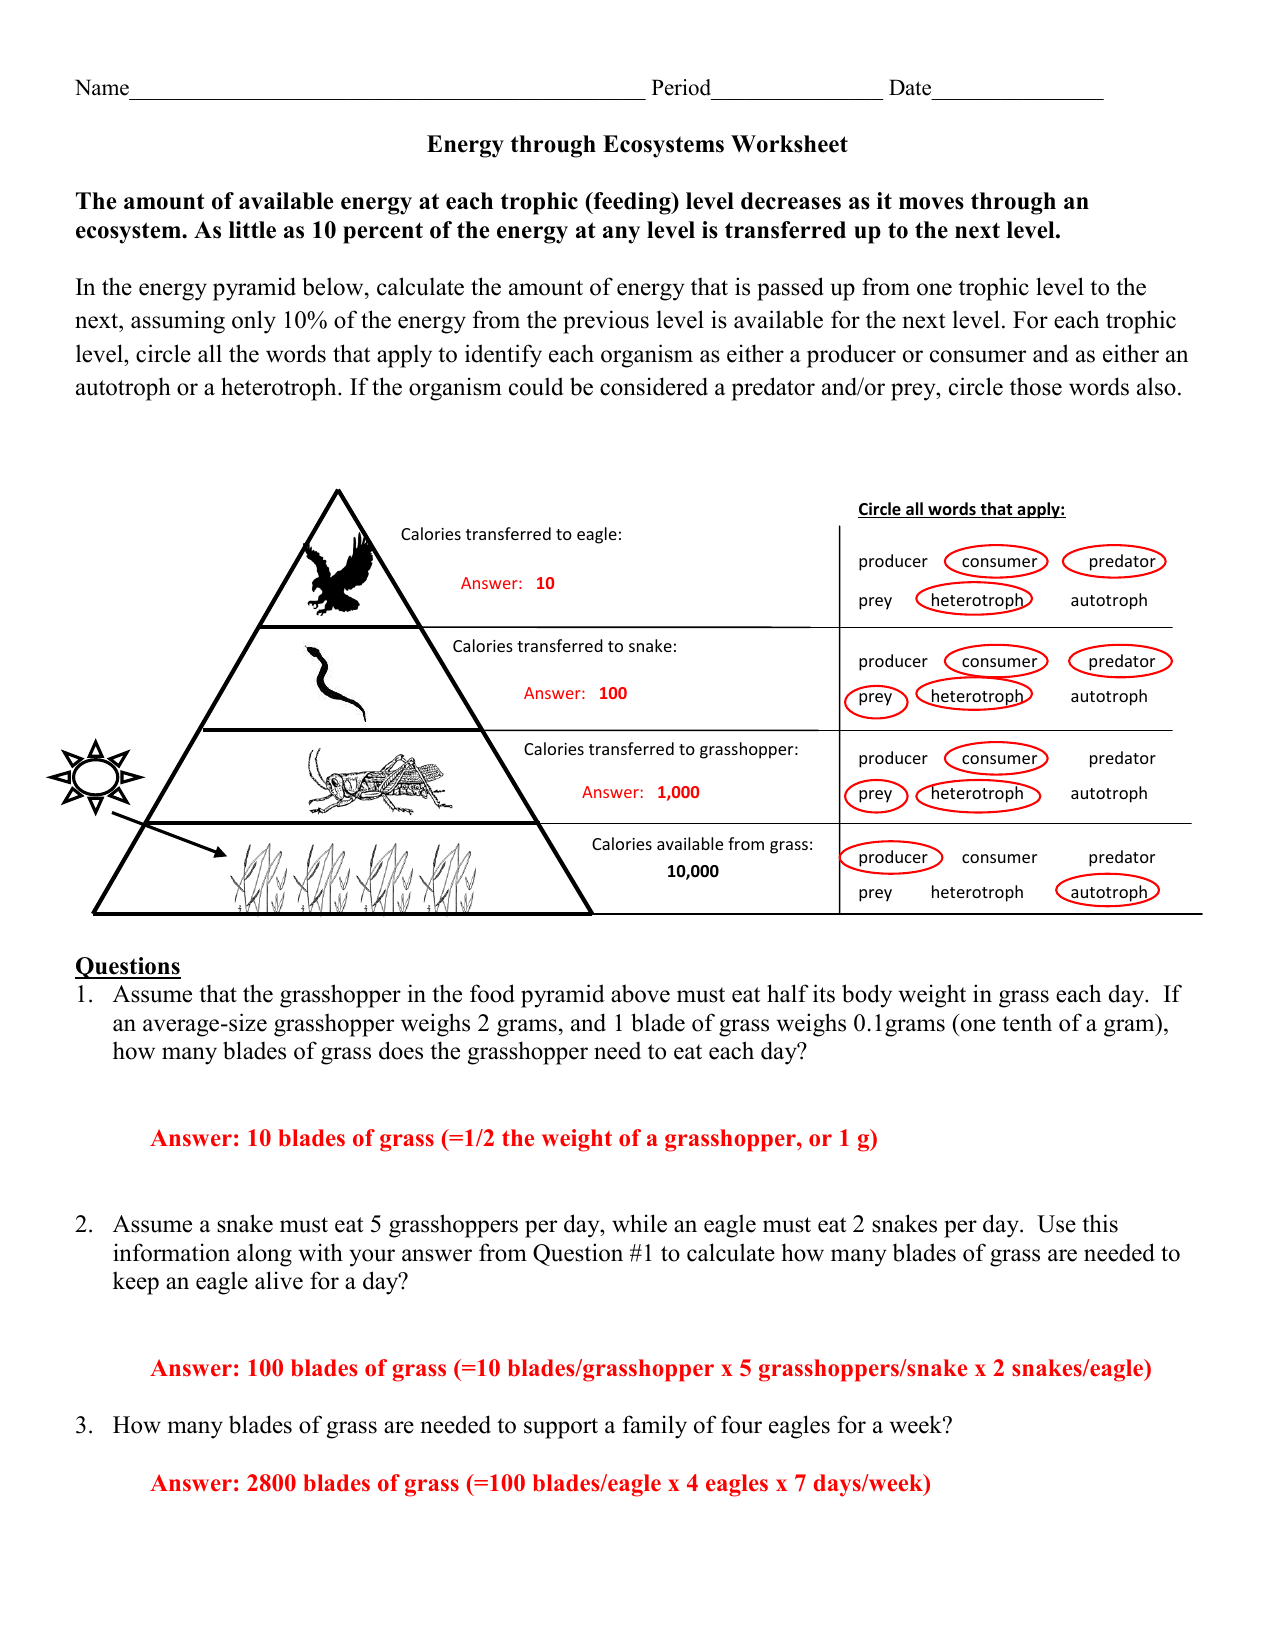 energy through an ecosystem worksheet With Ecological Pyramids Worksheet Answers